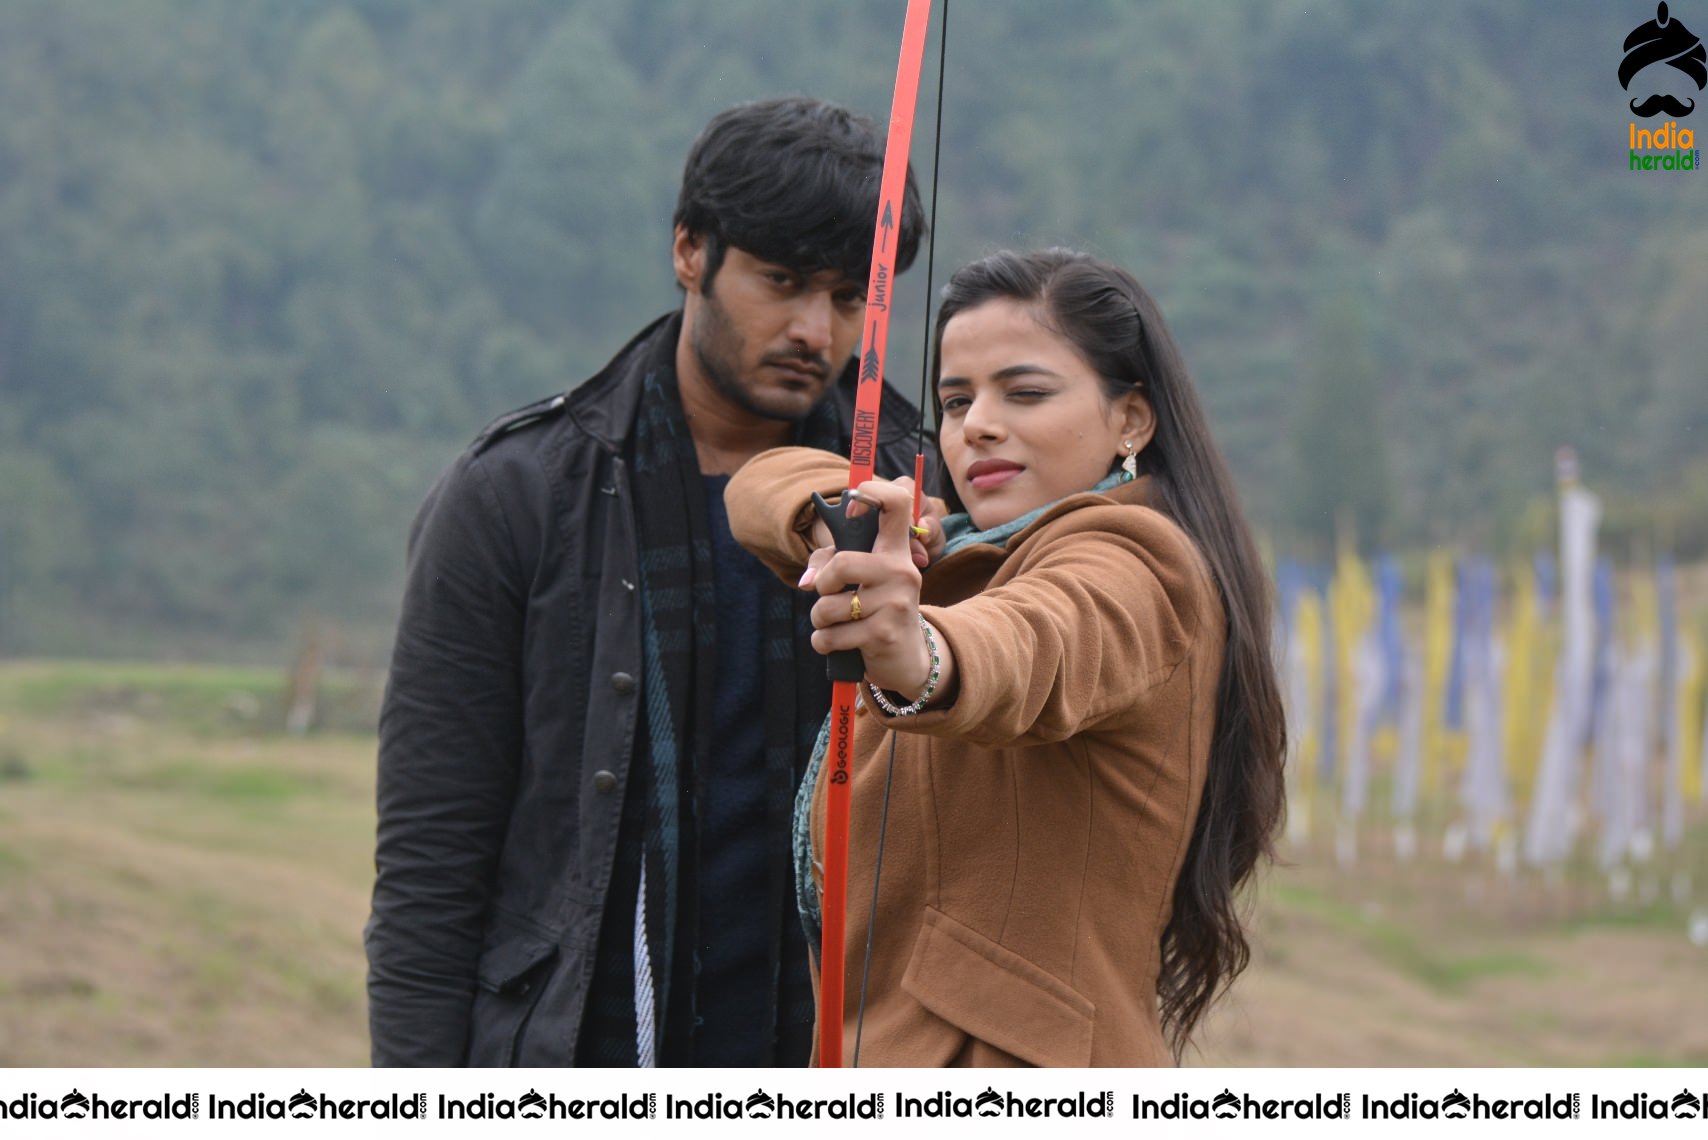 Movie Stills of Raahu Film which releases on Feb 21st